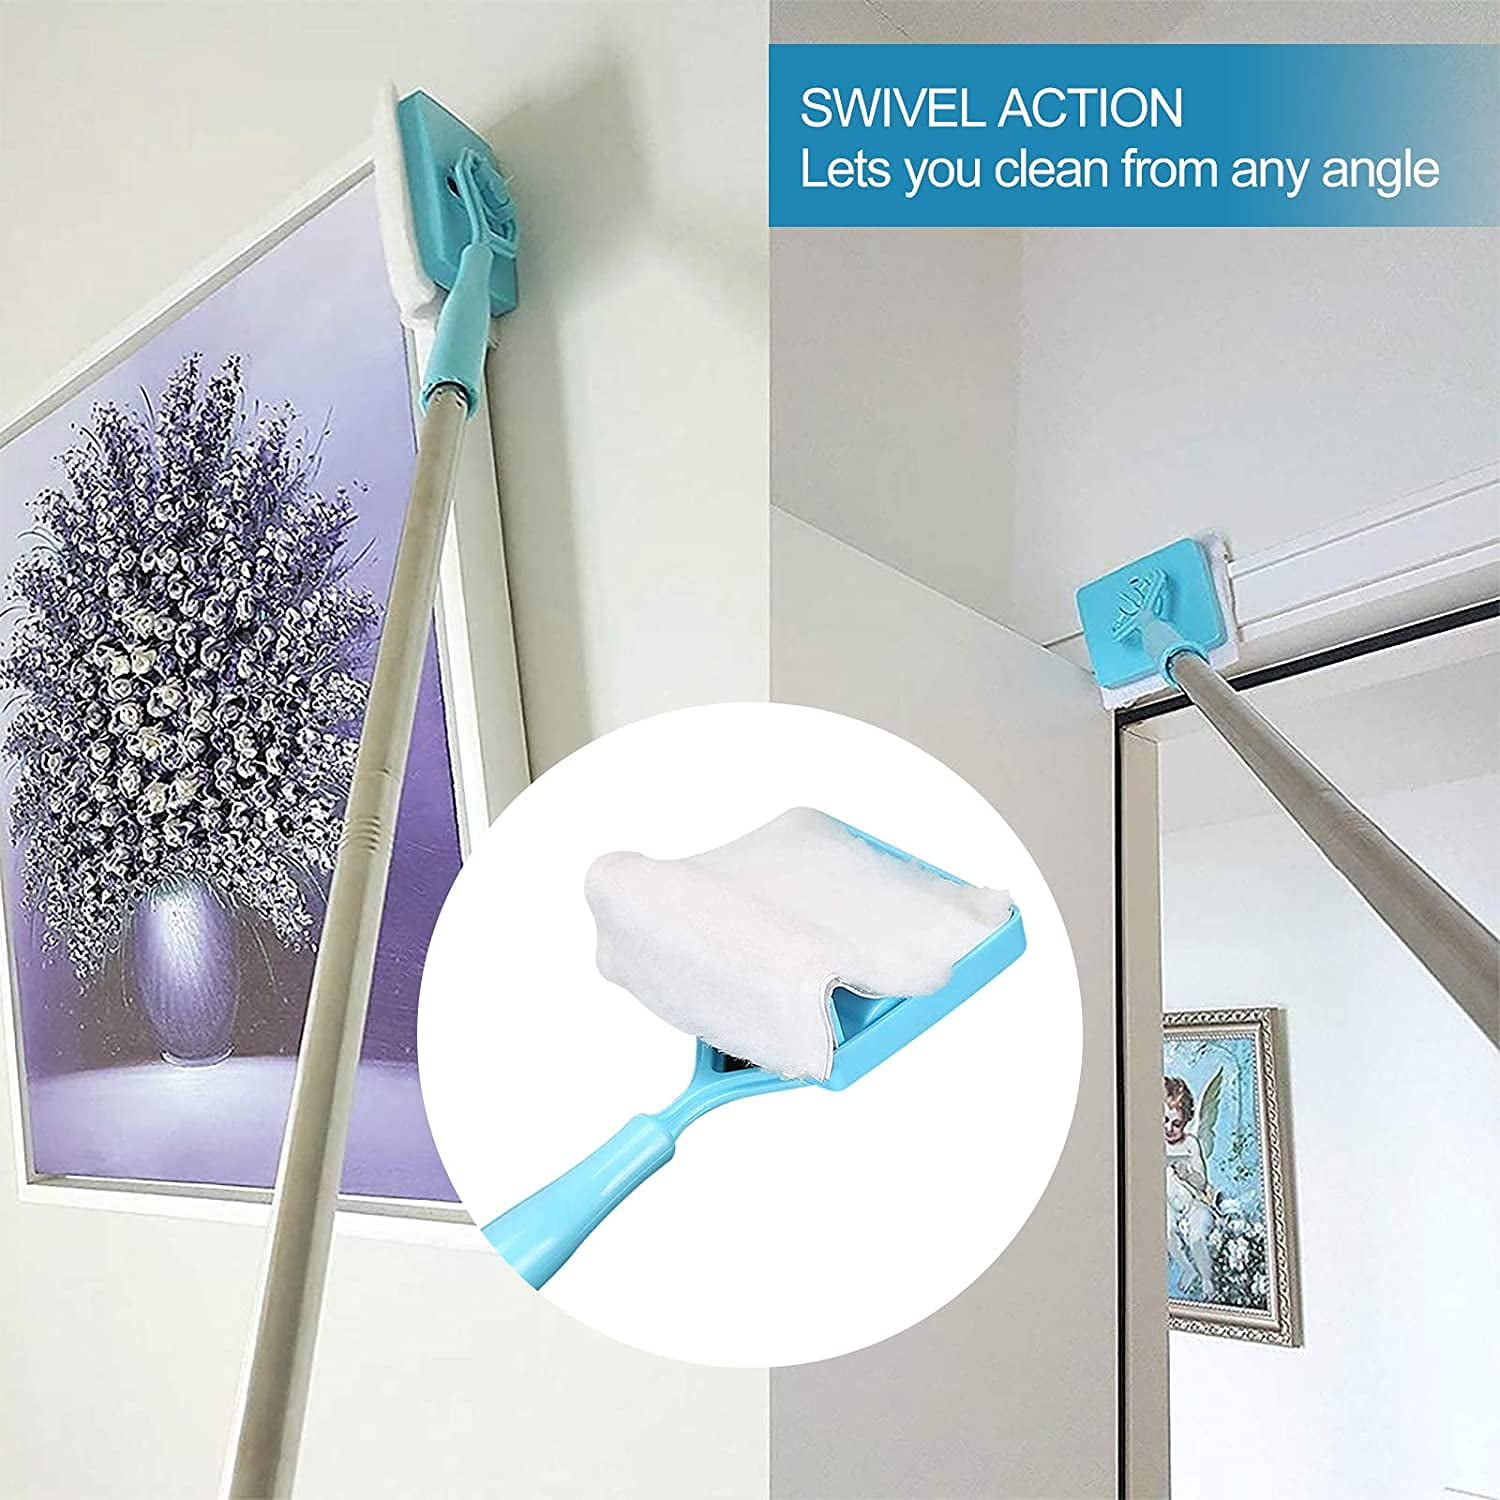 Baseboard Cleaner Tool with Handle, Baseboard Cleaner with Extendable Long  Handle, 5 Reusable Cleaning Pads Wall Cleaner for Baseboards Cleaning